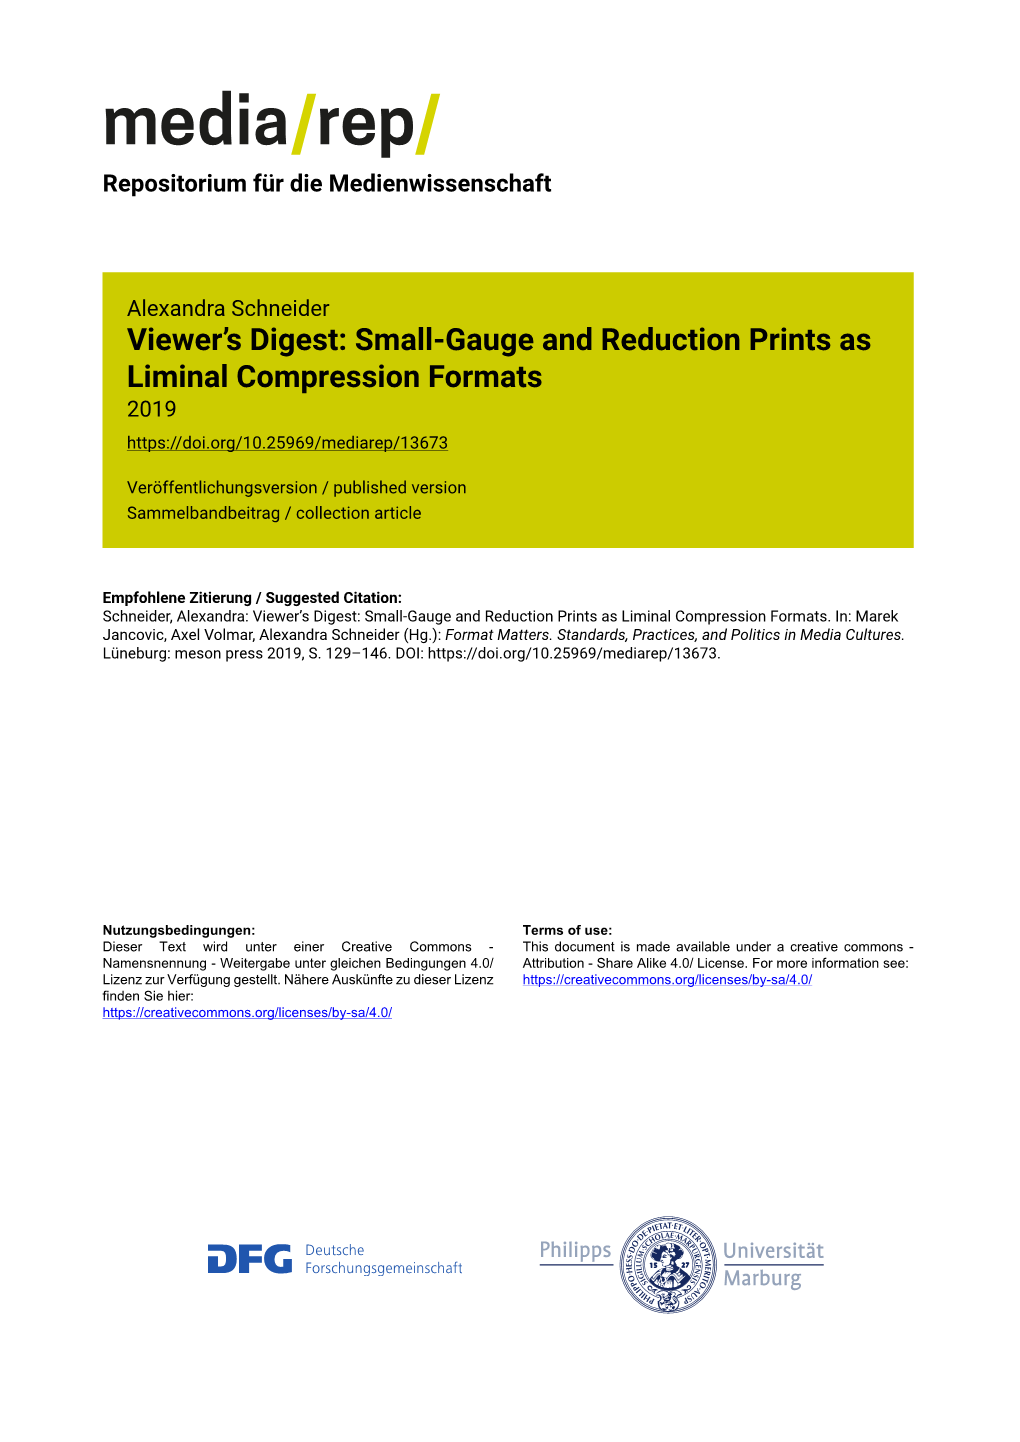 Viewer's Digest: Small-Gauge and Reduction Prints As Liminal Compression Formats